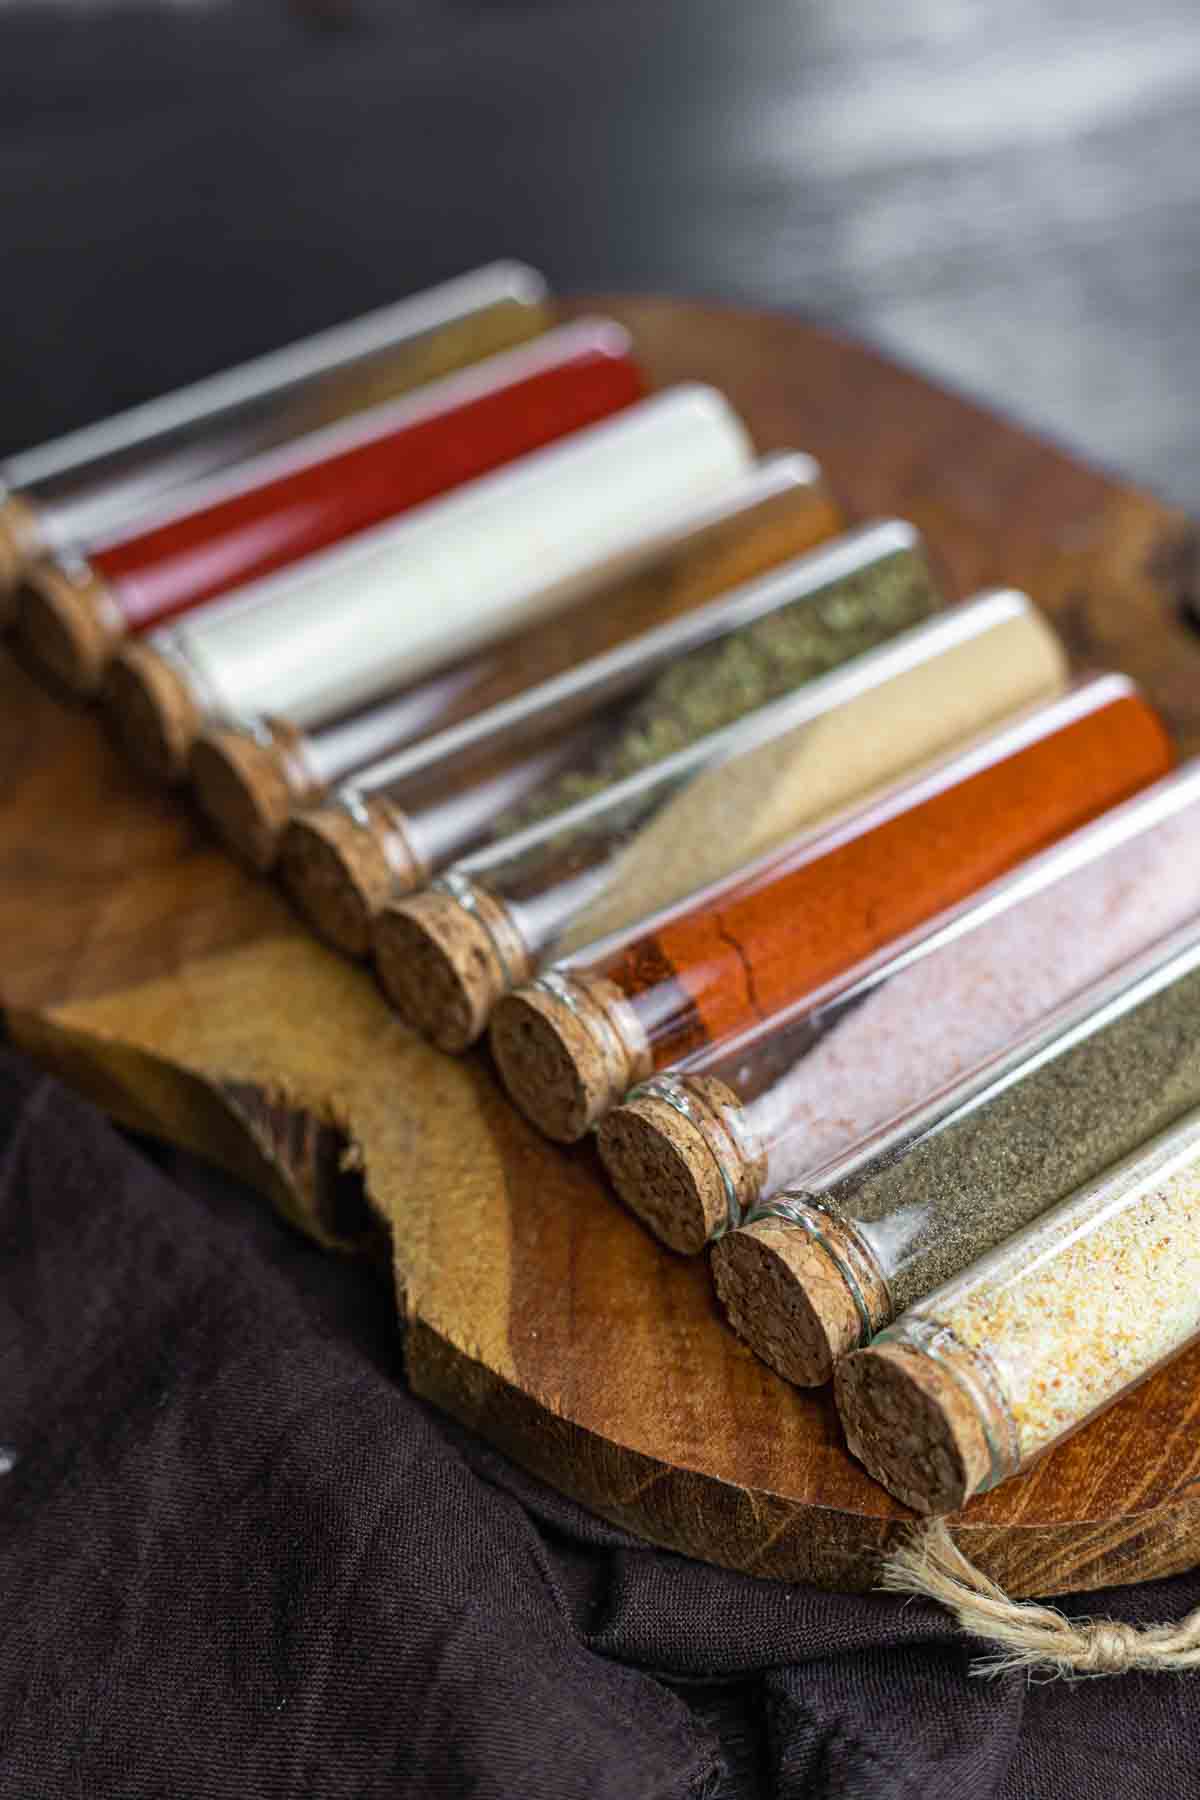 A set of spice jars on a wooden cutting board.